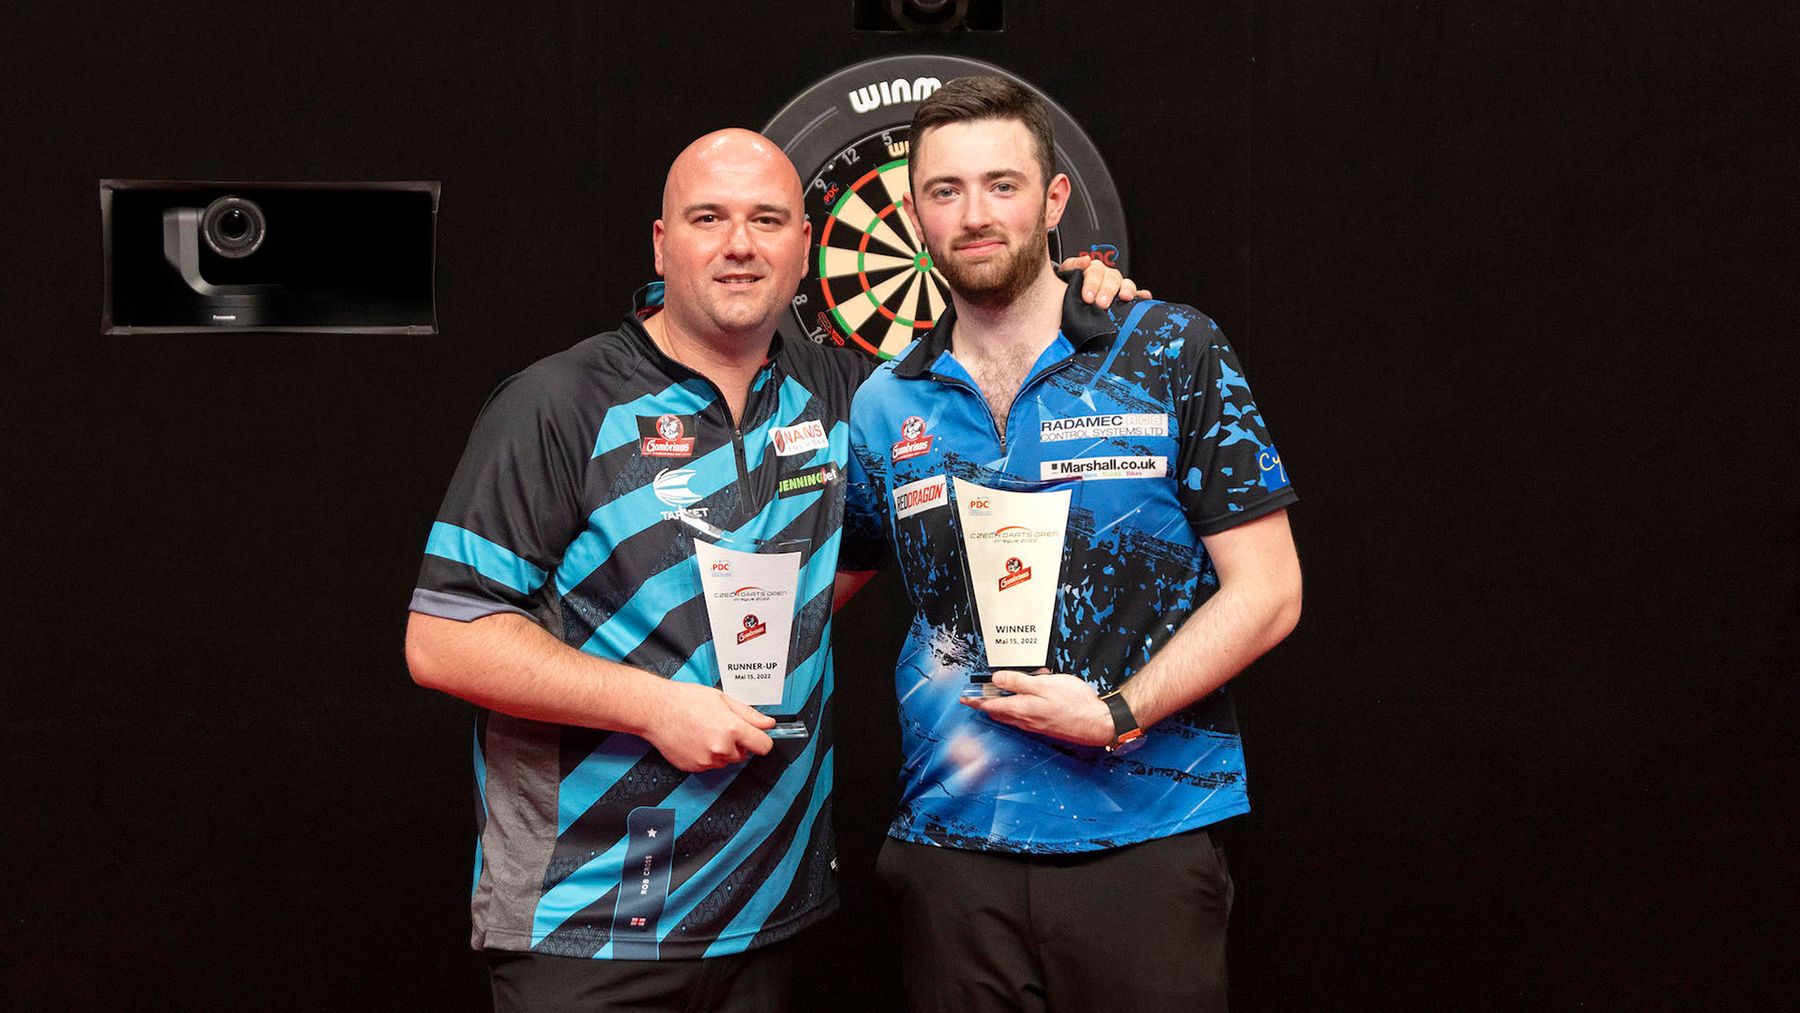 Czech Darts Open 2022 Draw, schedule, results, odds and TV coverage details